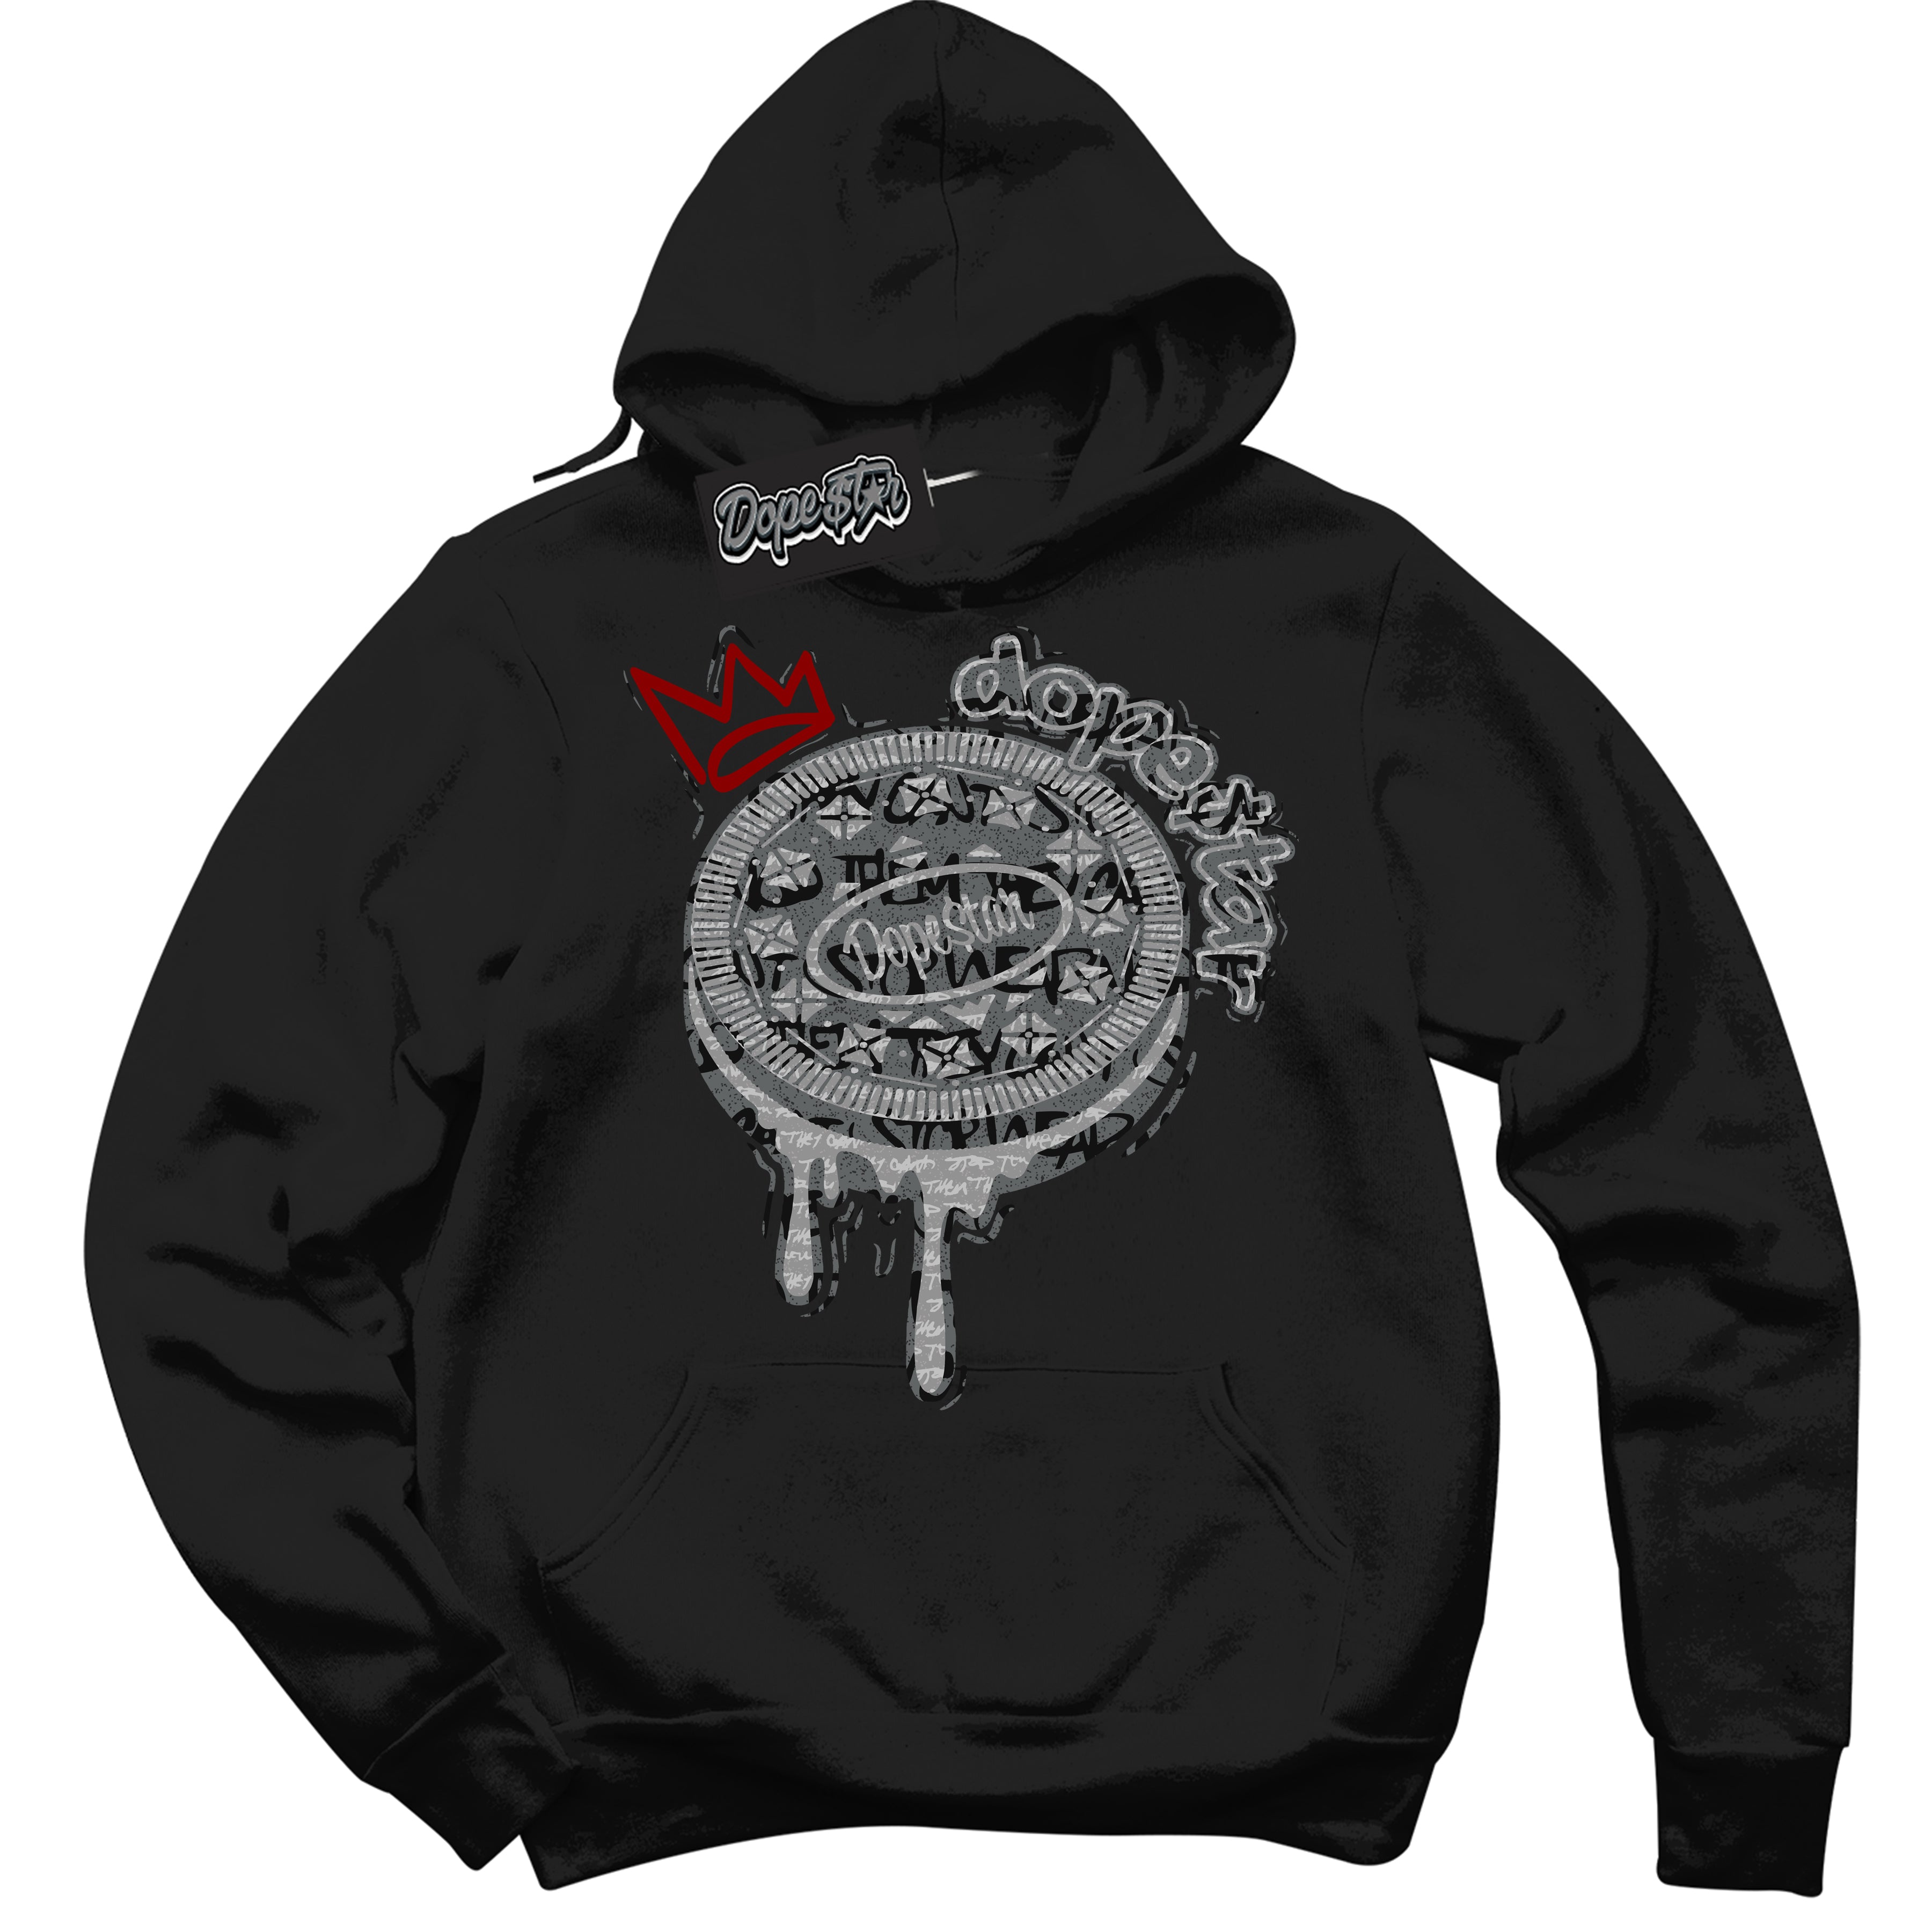 Cool Black Hoodie with “ Oreo DS ”  design that Perfectly Matches Rebellionaire 1s Sneakers.